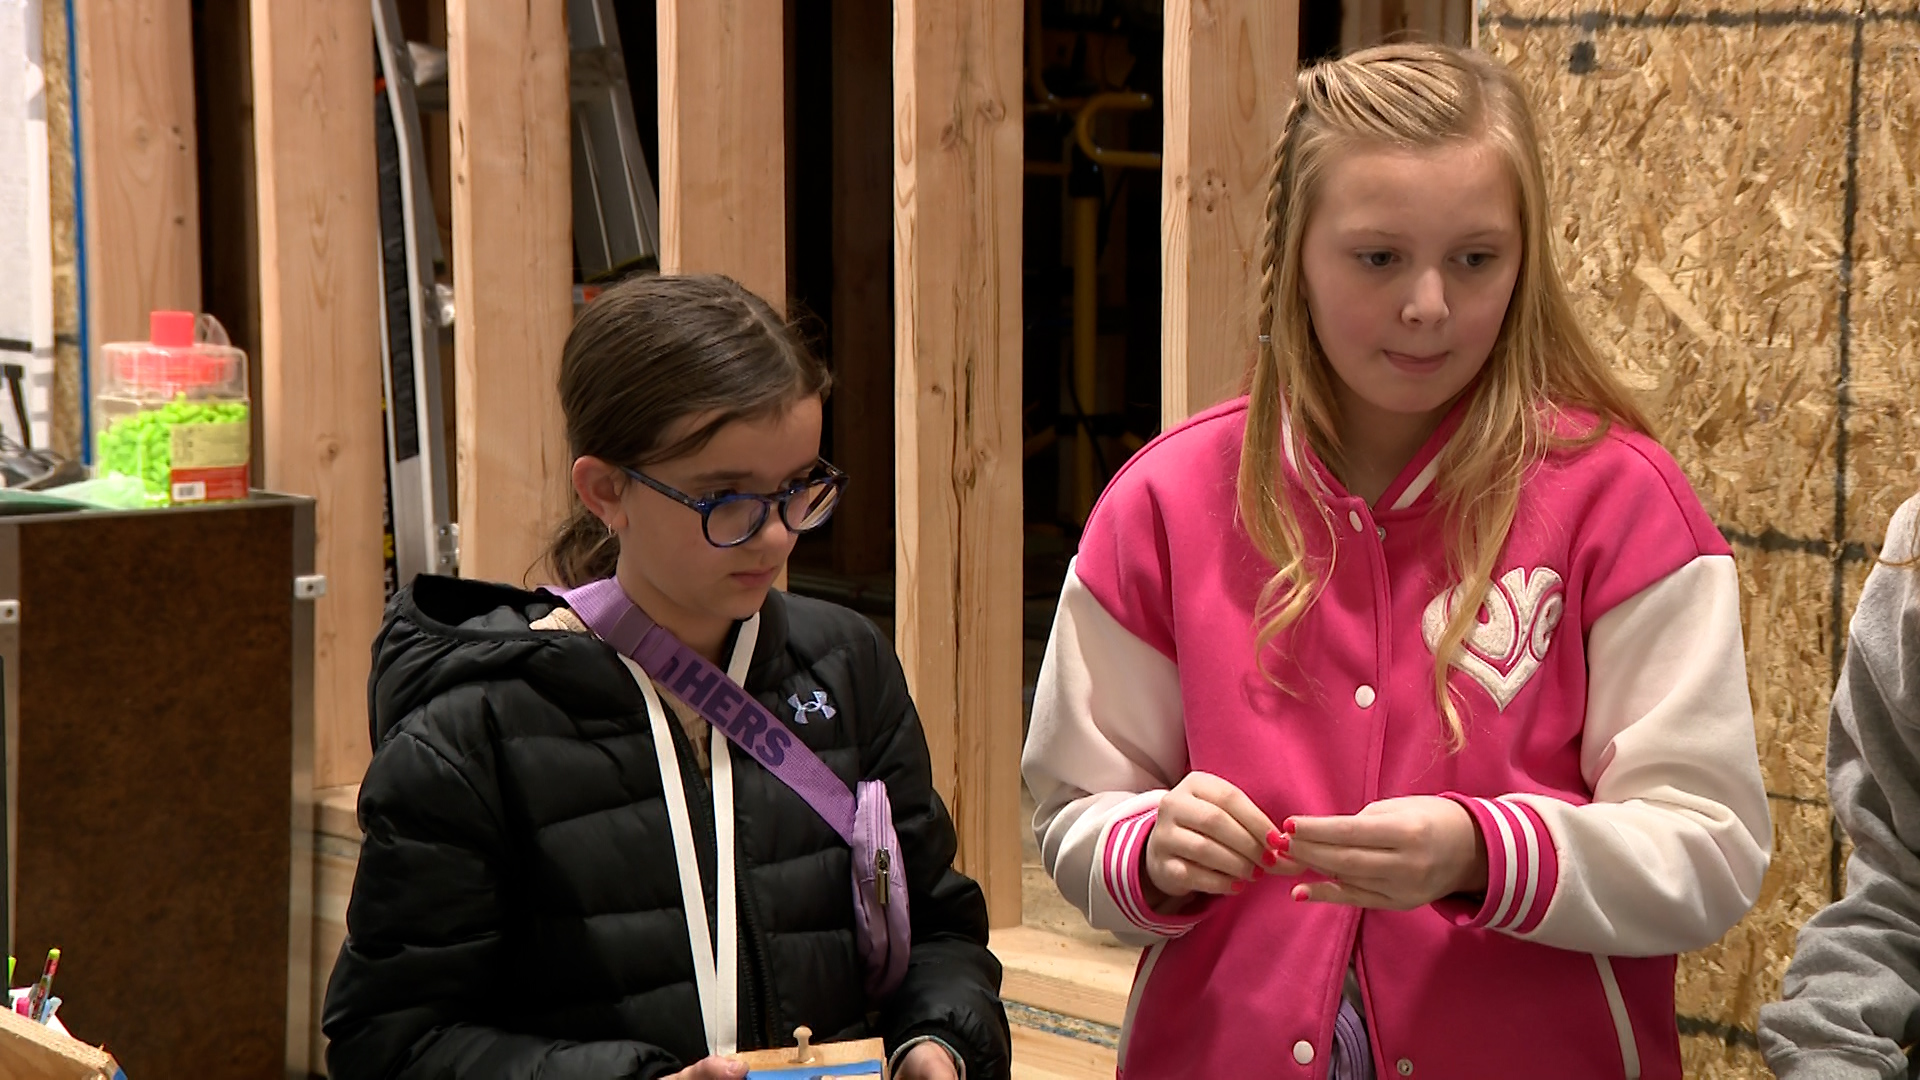 The "Teach Hers" event in Davis School District hopes to keeps girls' interests in careers that are...